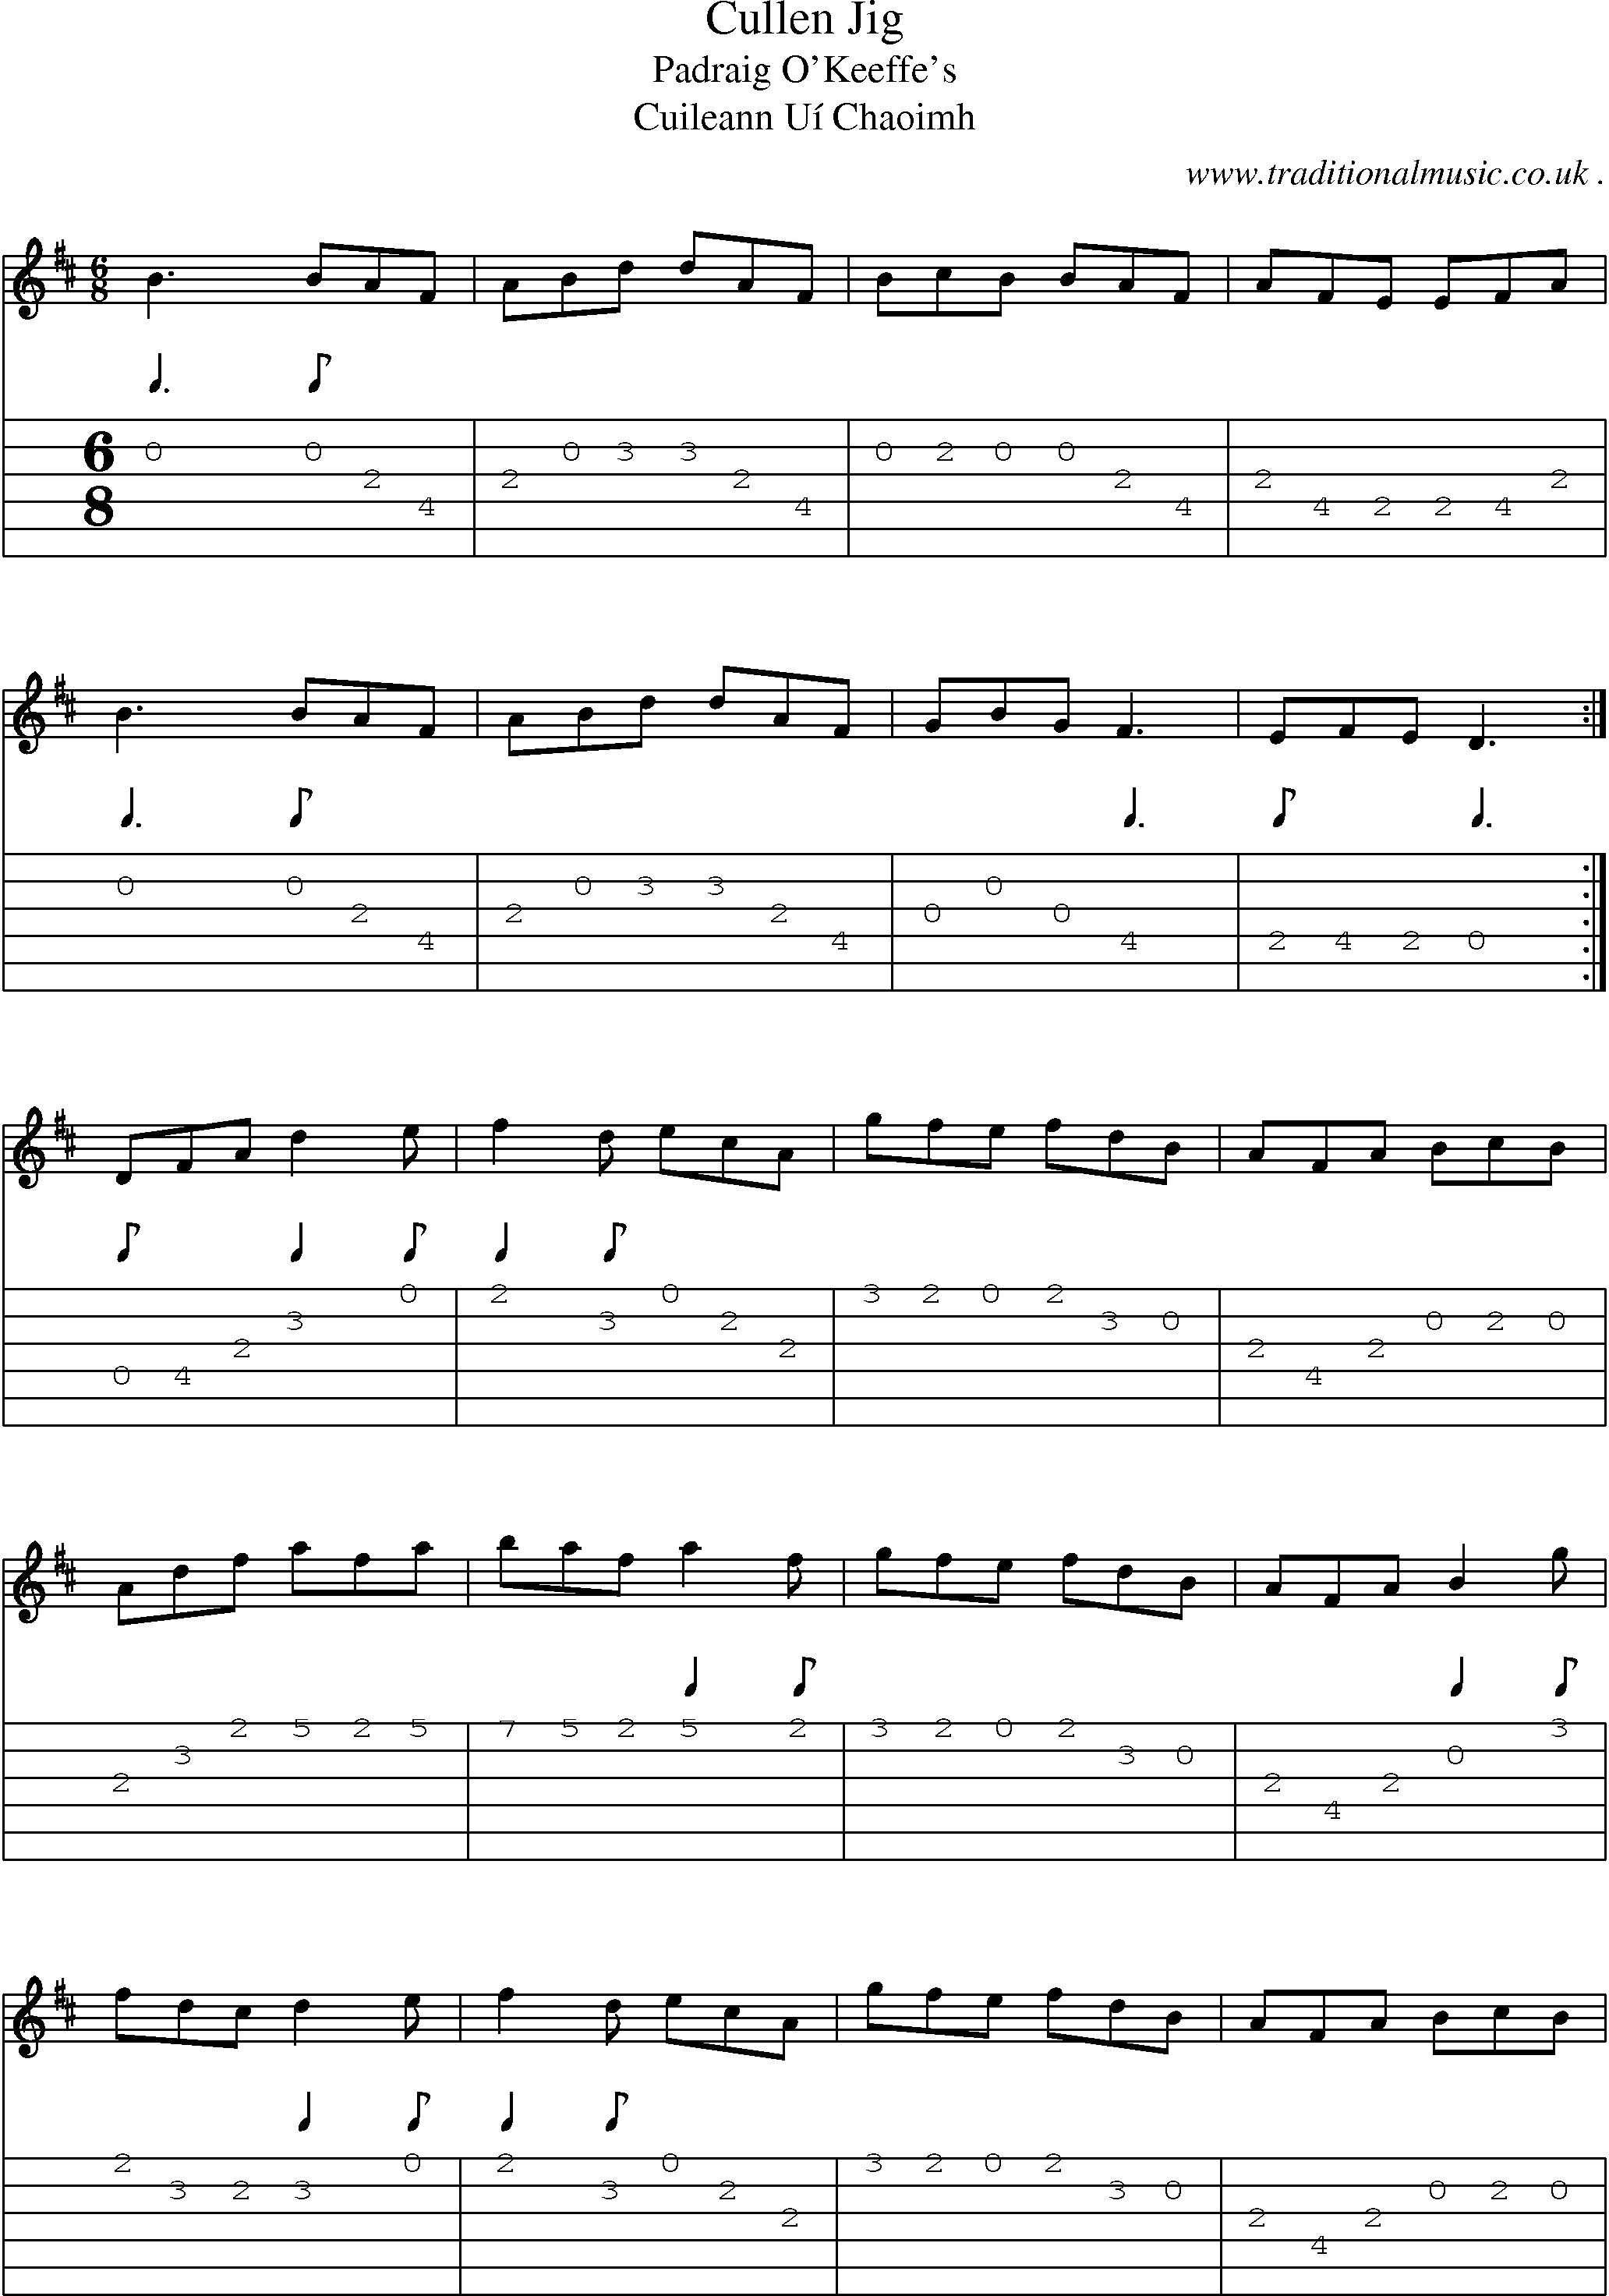 Sheet-Music and Guitar Tabs for Cullen Jig